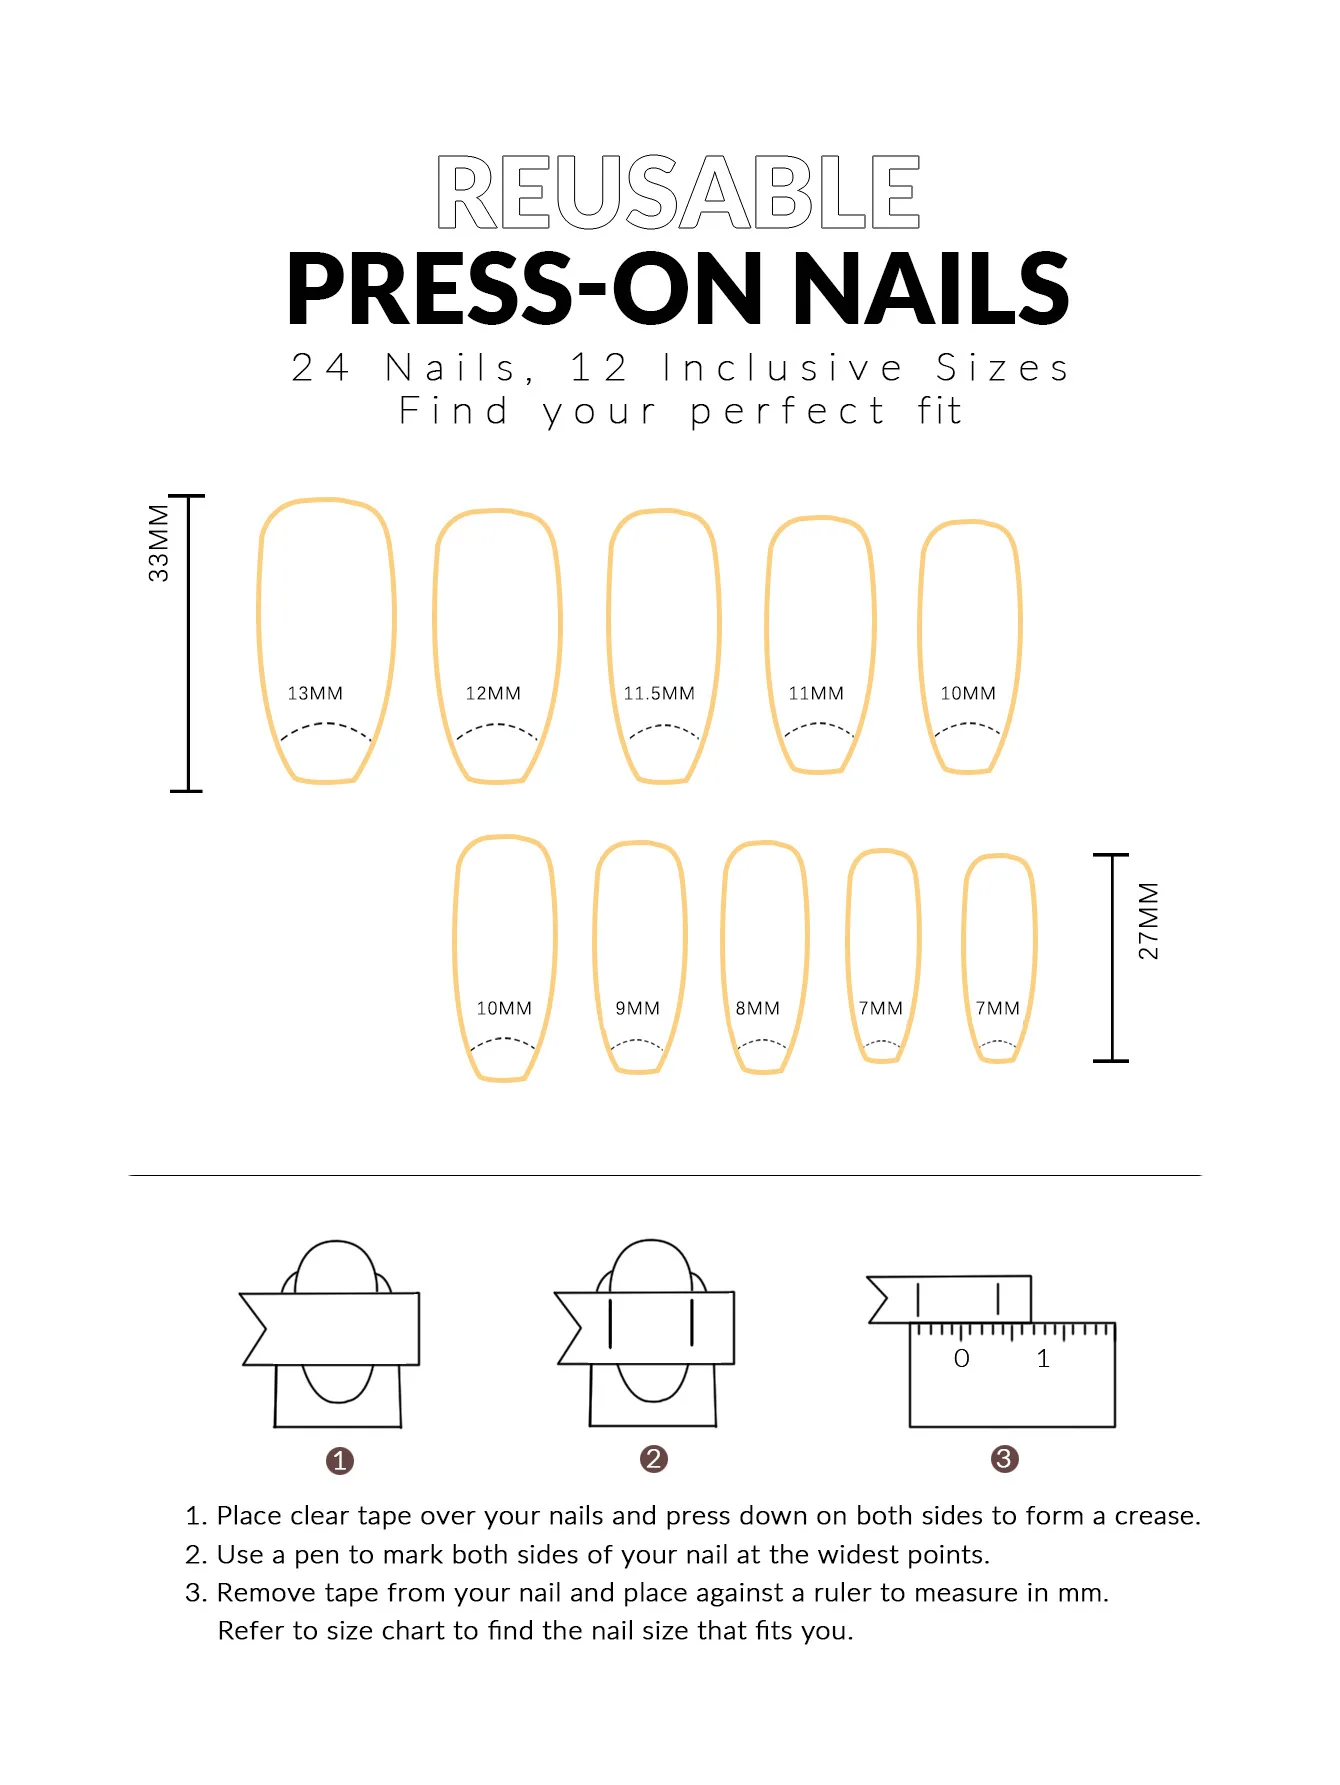 Christmas Style Design Special Festival Design Press On Nails - Buy ...